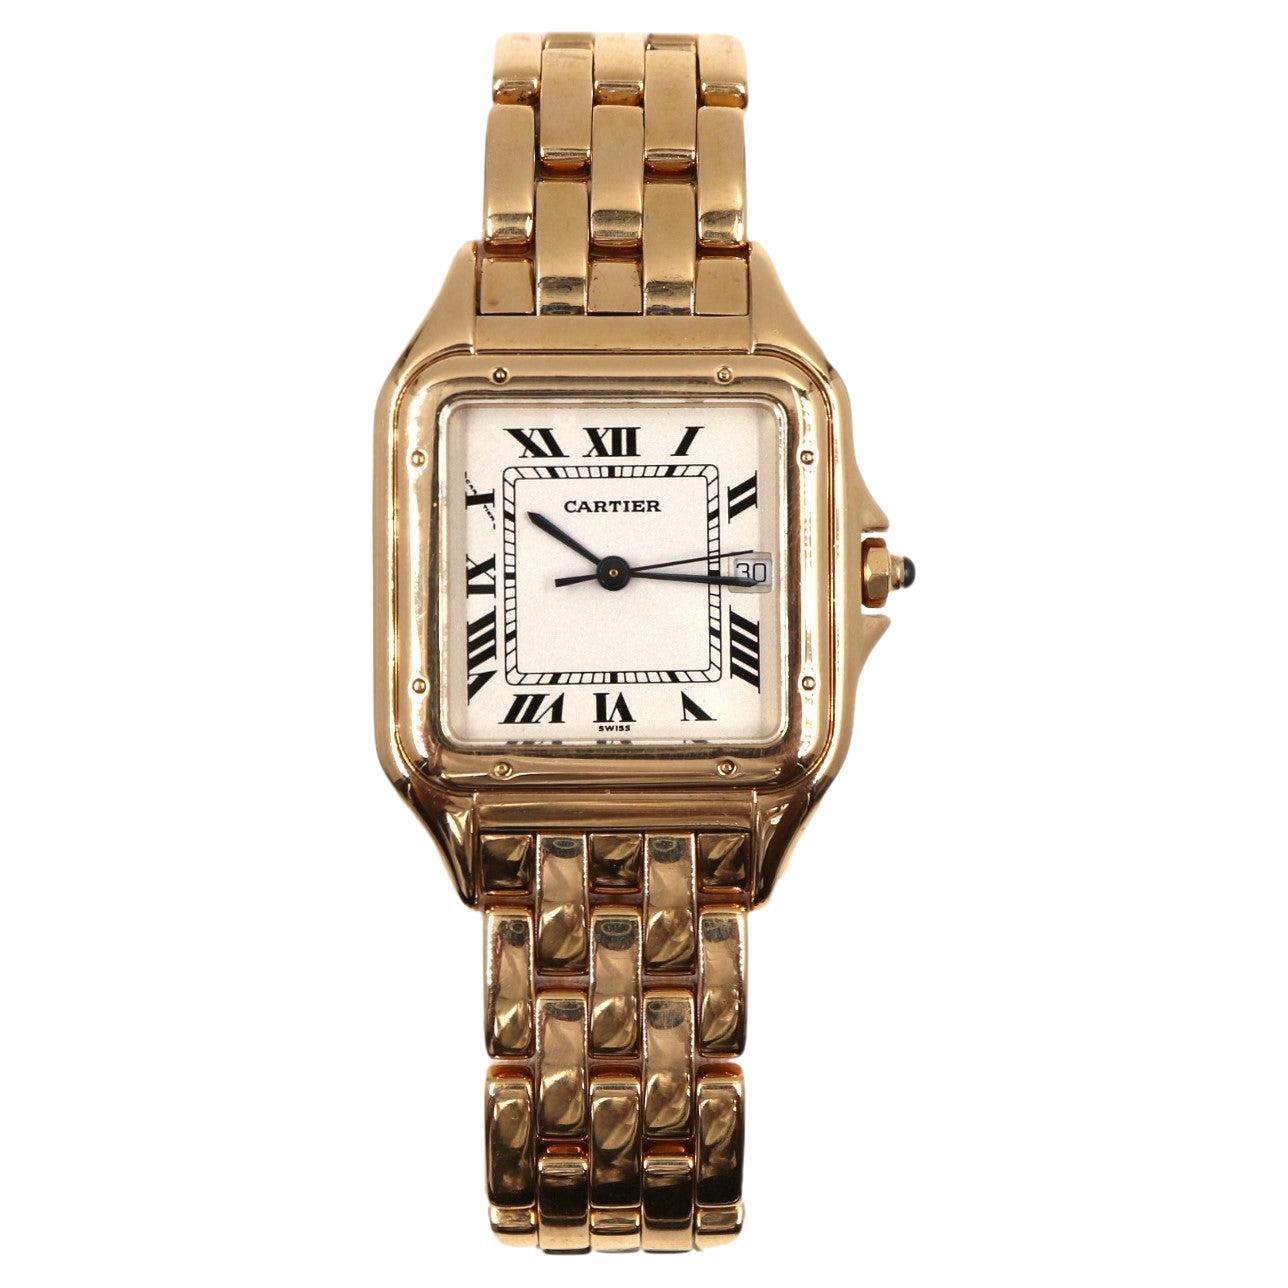 Bud Fox Wall Street Pre-Owned Coveted Cartier Large Panthere Watch 18K Gold 27mm